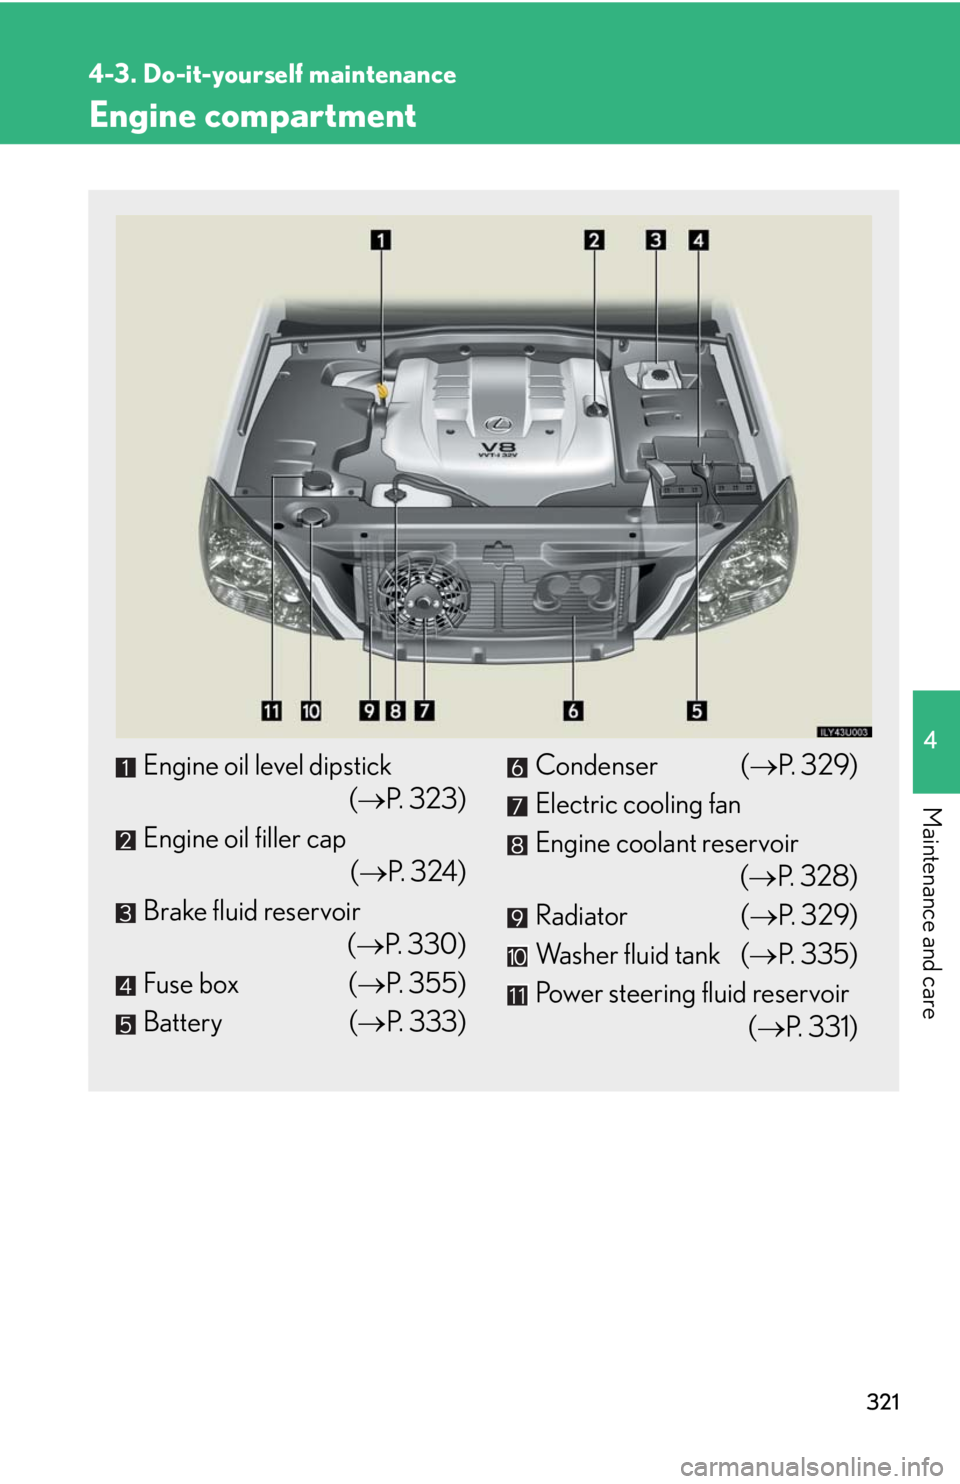 Lexus GX470 2008  Opening, closing and locking the doors / LEXUS 2008 GX470 OWNERS MANUAL (OM60D82U) 321
4-3. Do-it-yourself maintenance
4
Maintenance and care
Engine compartment
Engine oil level dipstick(P. 323)
Engine oil filler cap (P. 324)
Brake fluid reservoir (P. 330)
Fuse box ( P. 